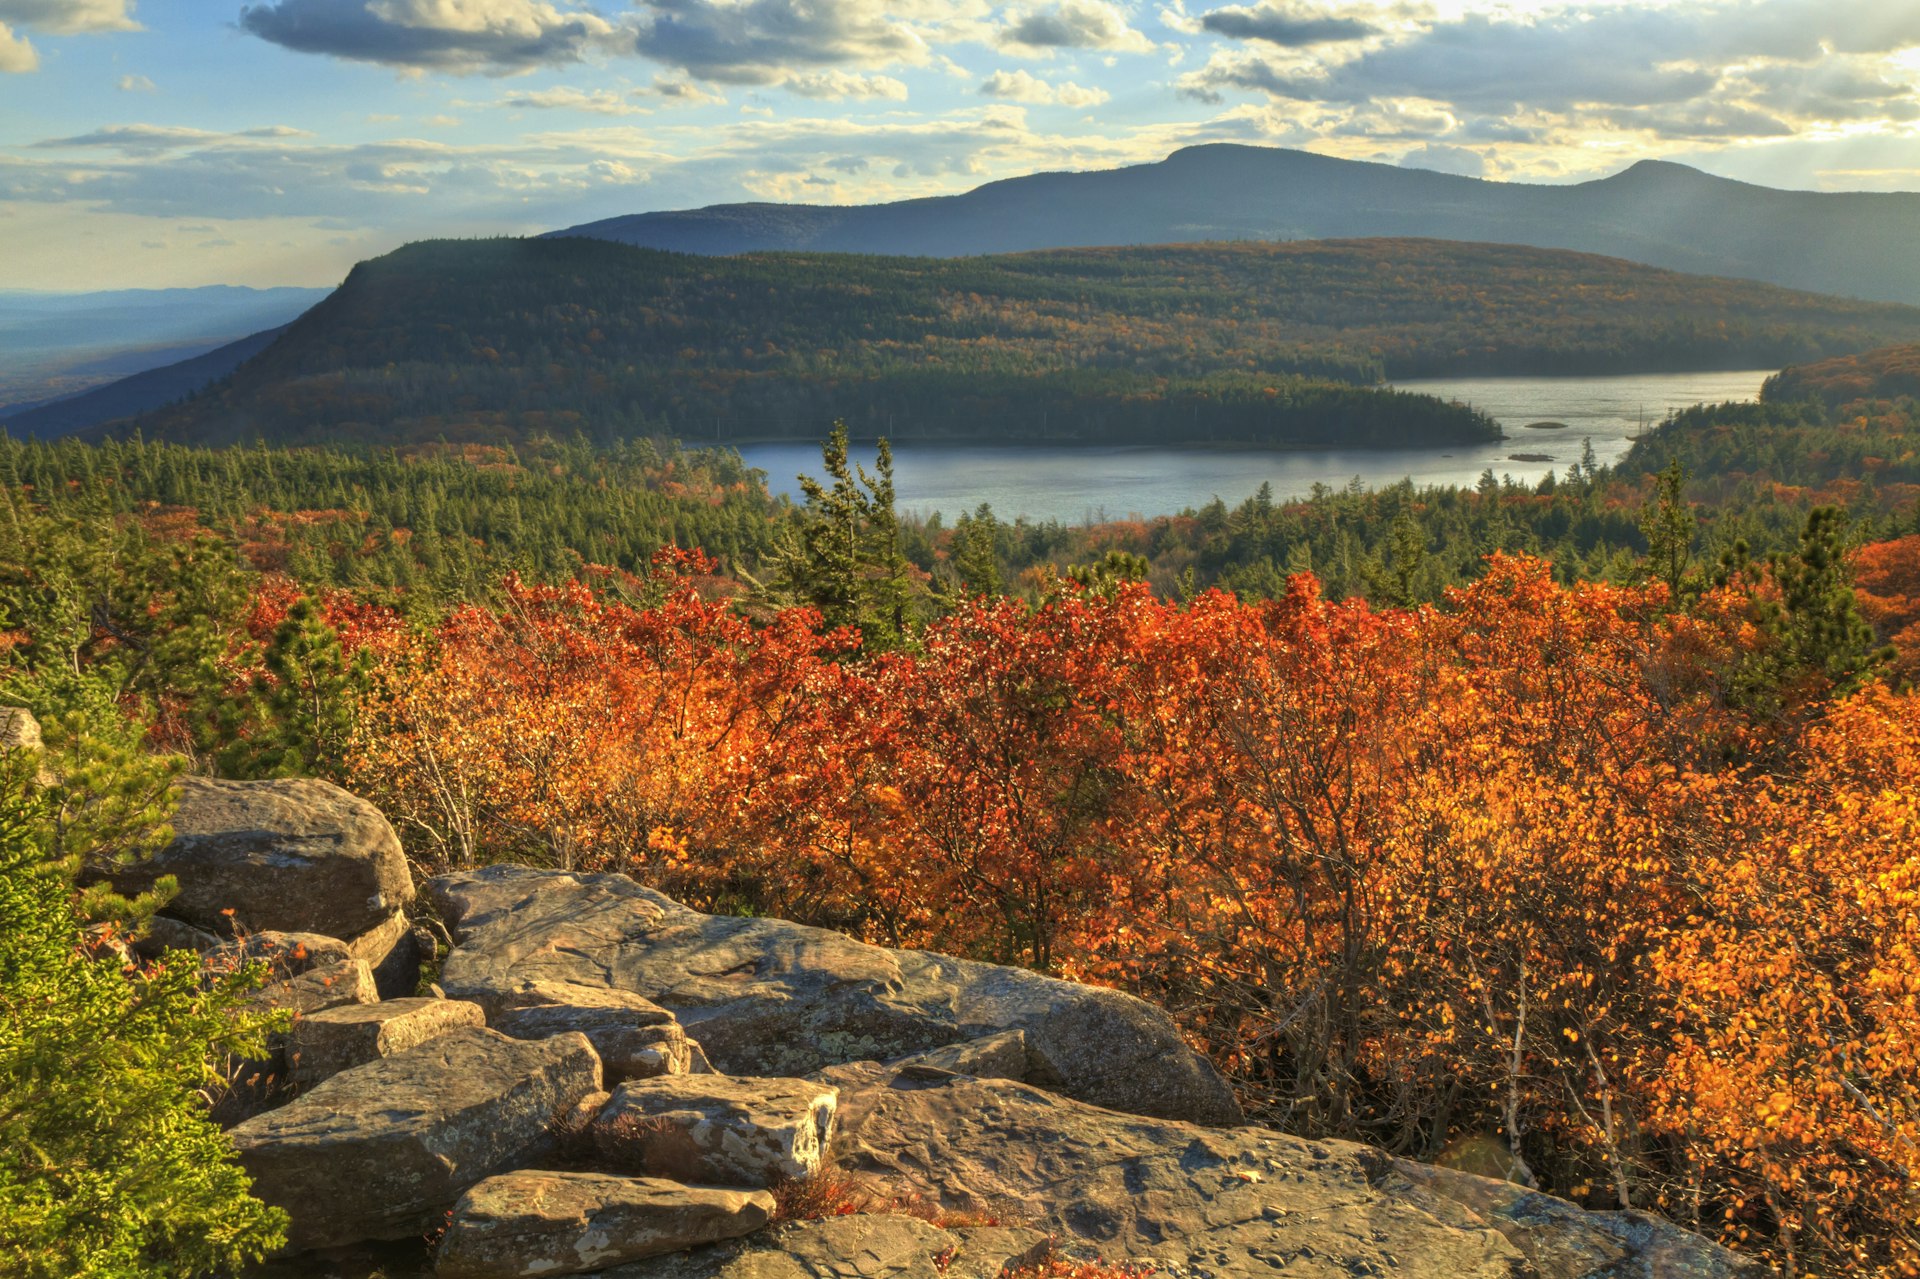 Afternoon sun on sunset rock during Autumn, overlooking North-South Lake in the Catskills Mountains of New York.